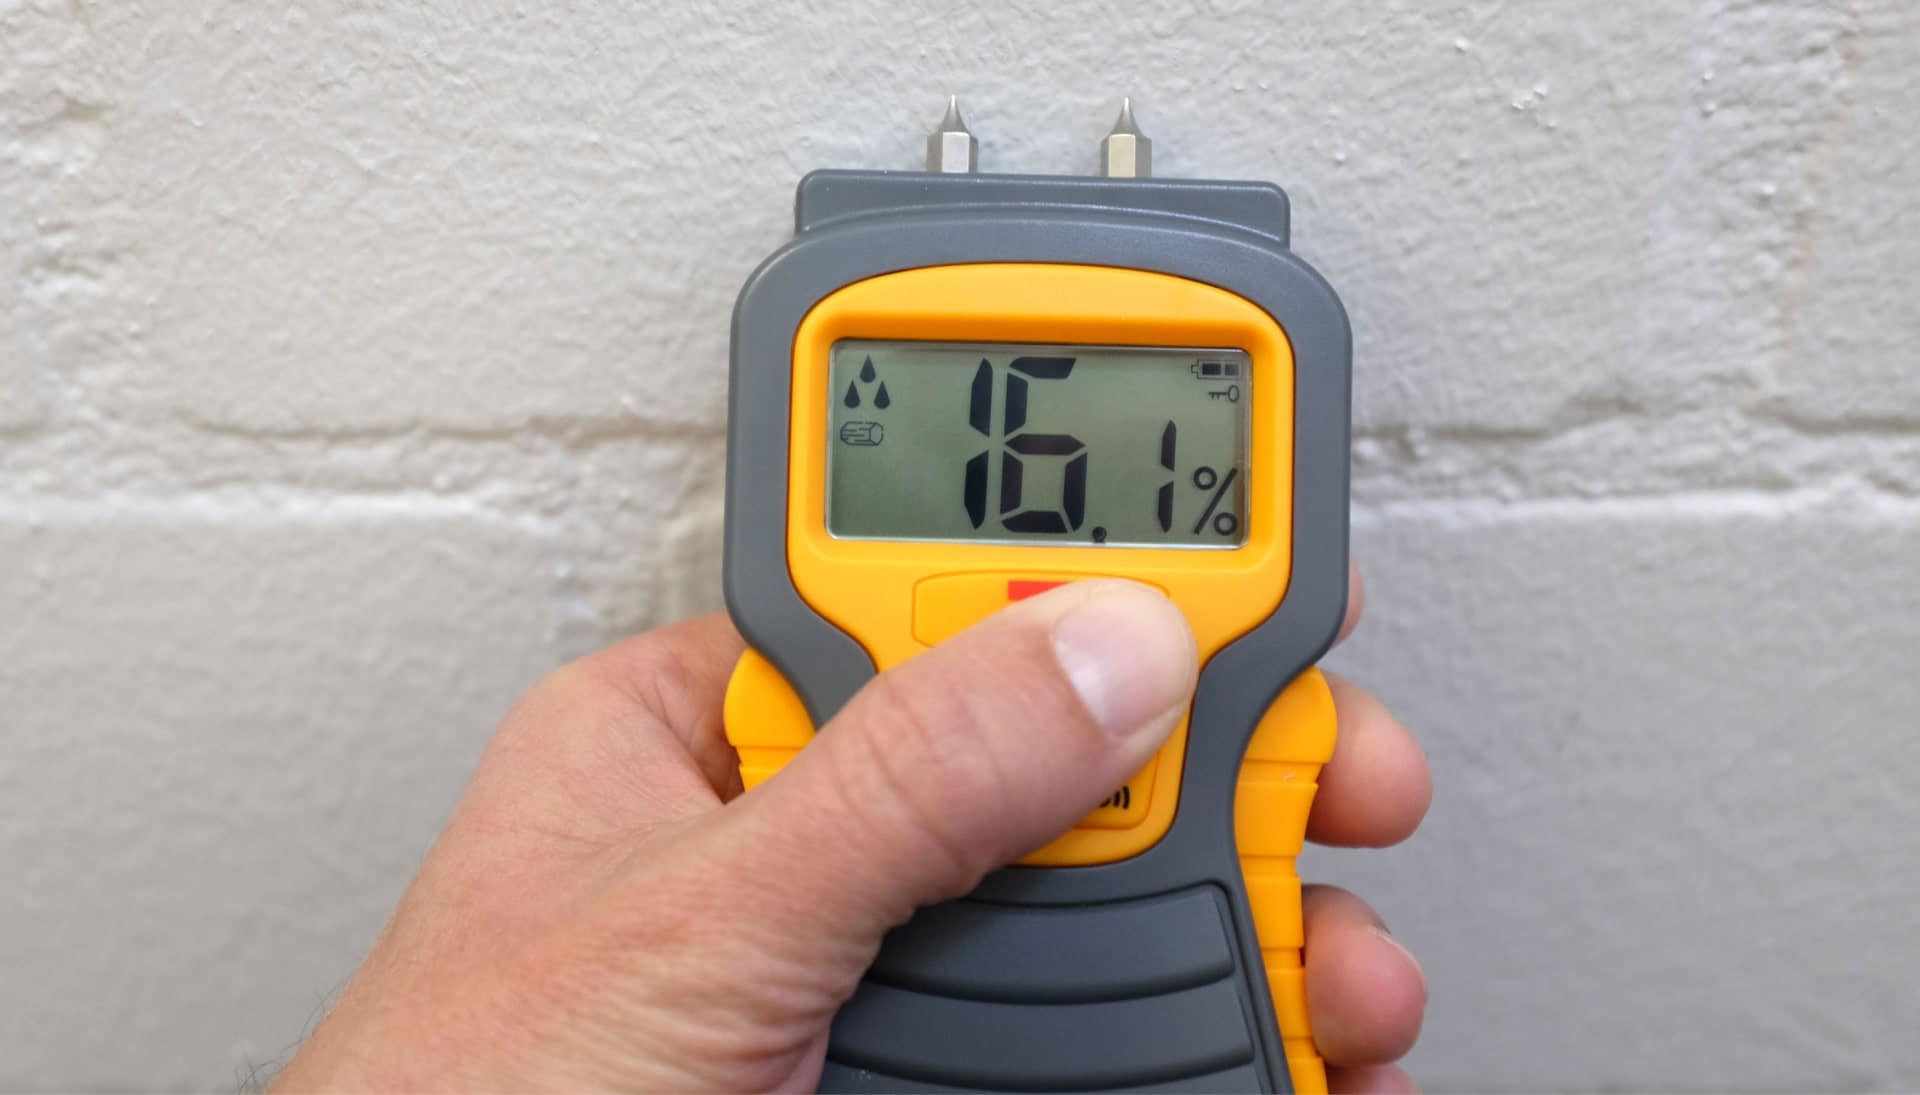 We provide fast, accurate, and affordable mold testing services in Aurora, Colorado.